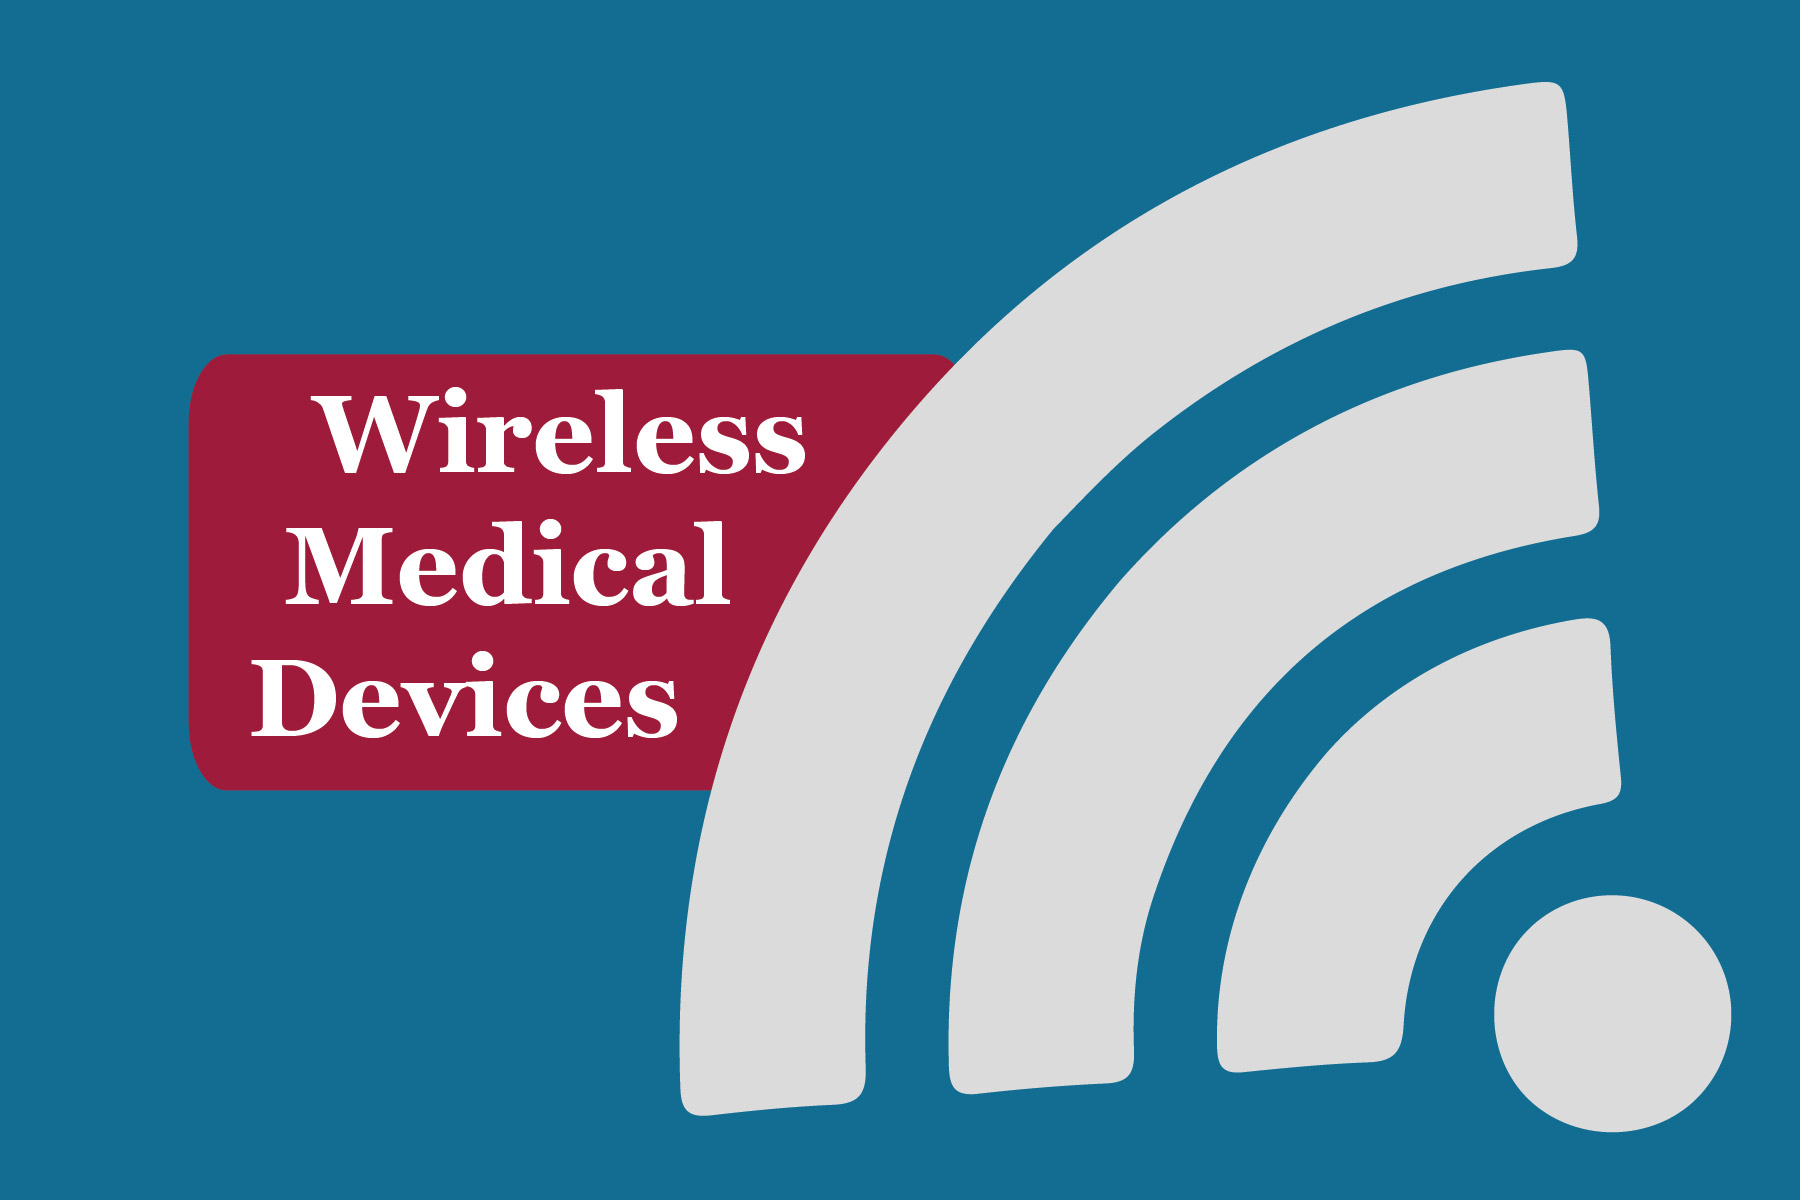 Wireless Medical Devices